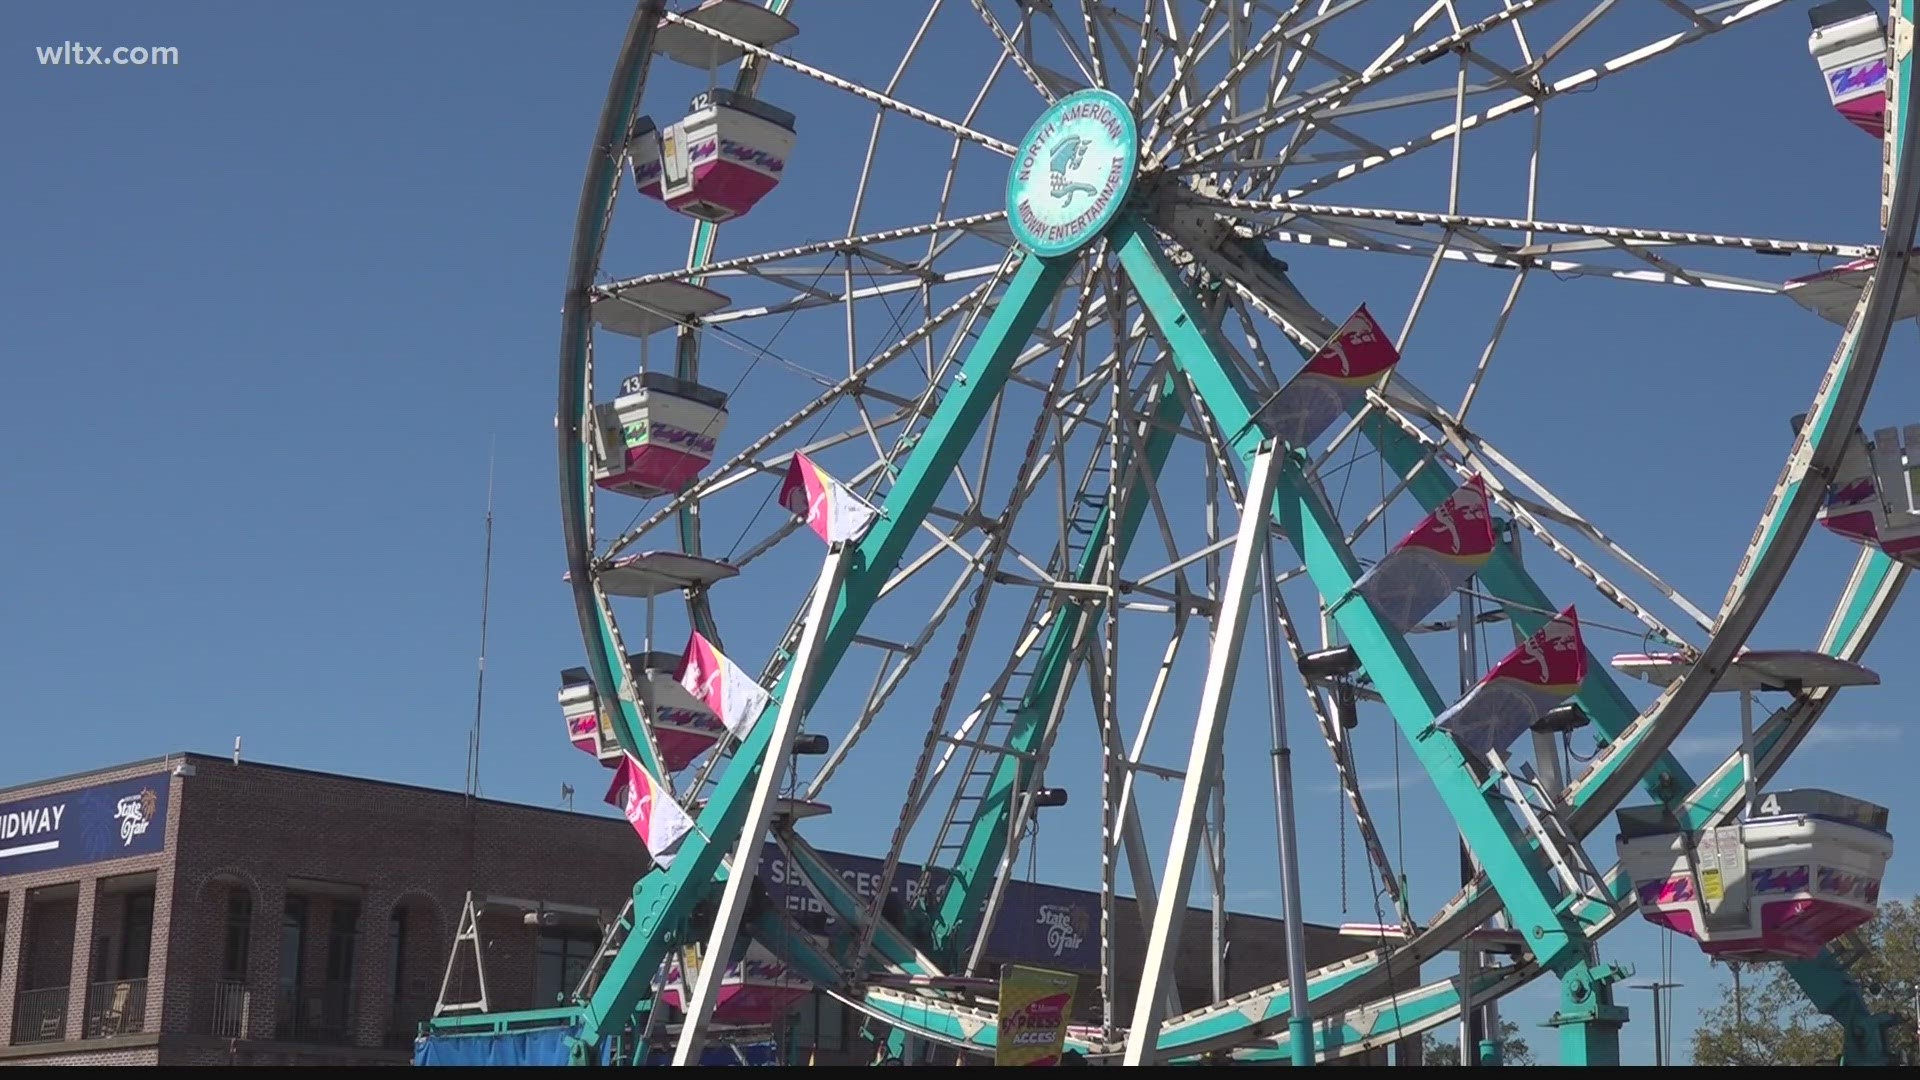 The South Carolina State Fair was open from 10 a.m. until 12 p.m. without flashing lights or loud noises to allow people with sensory processing disorders to enjoy.